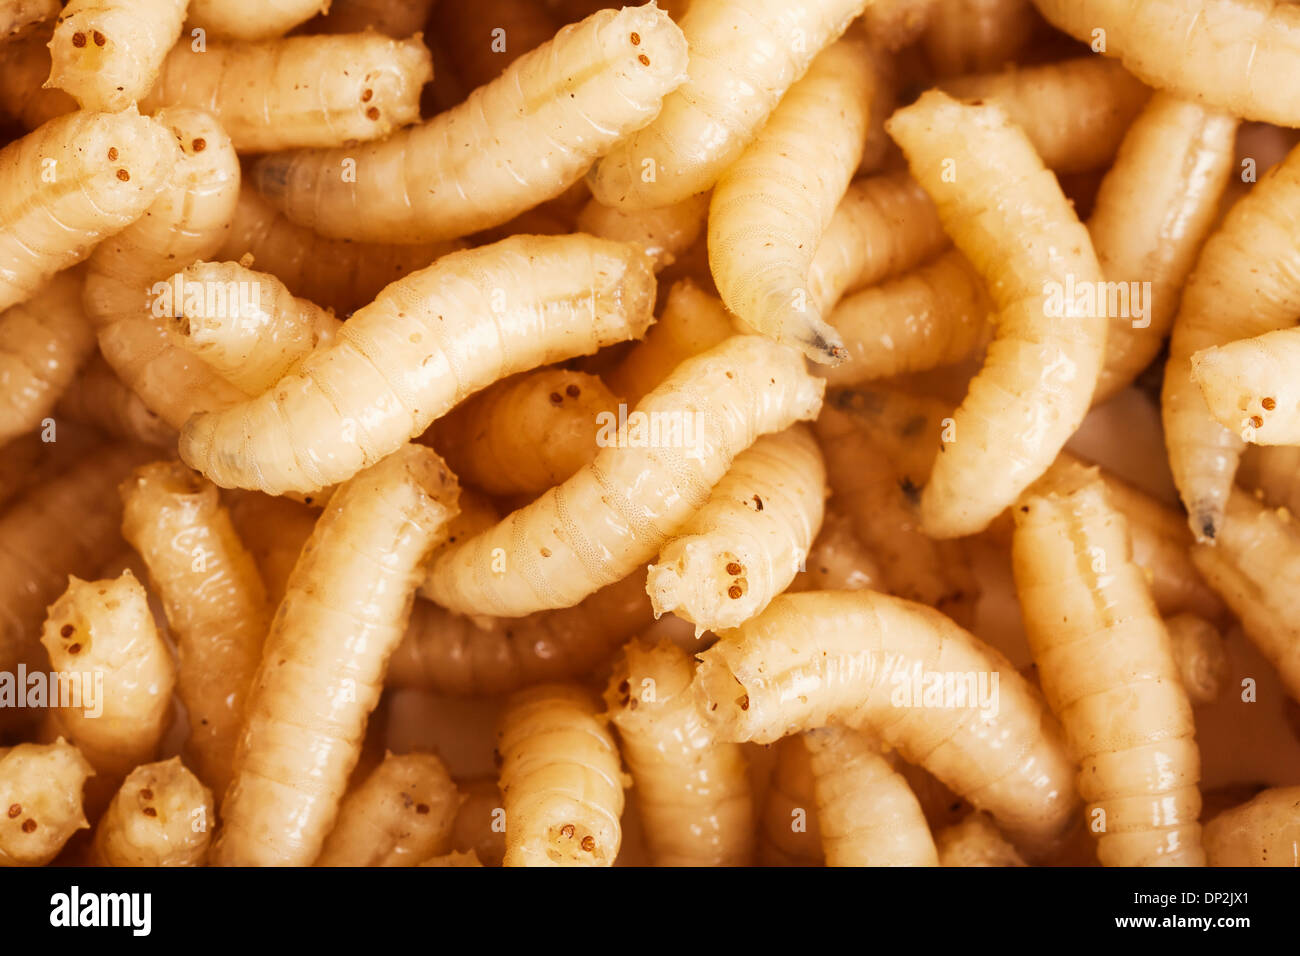 How to Kill Maggots and Get Rid of Infestation